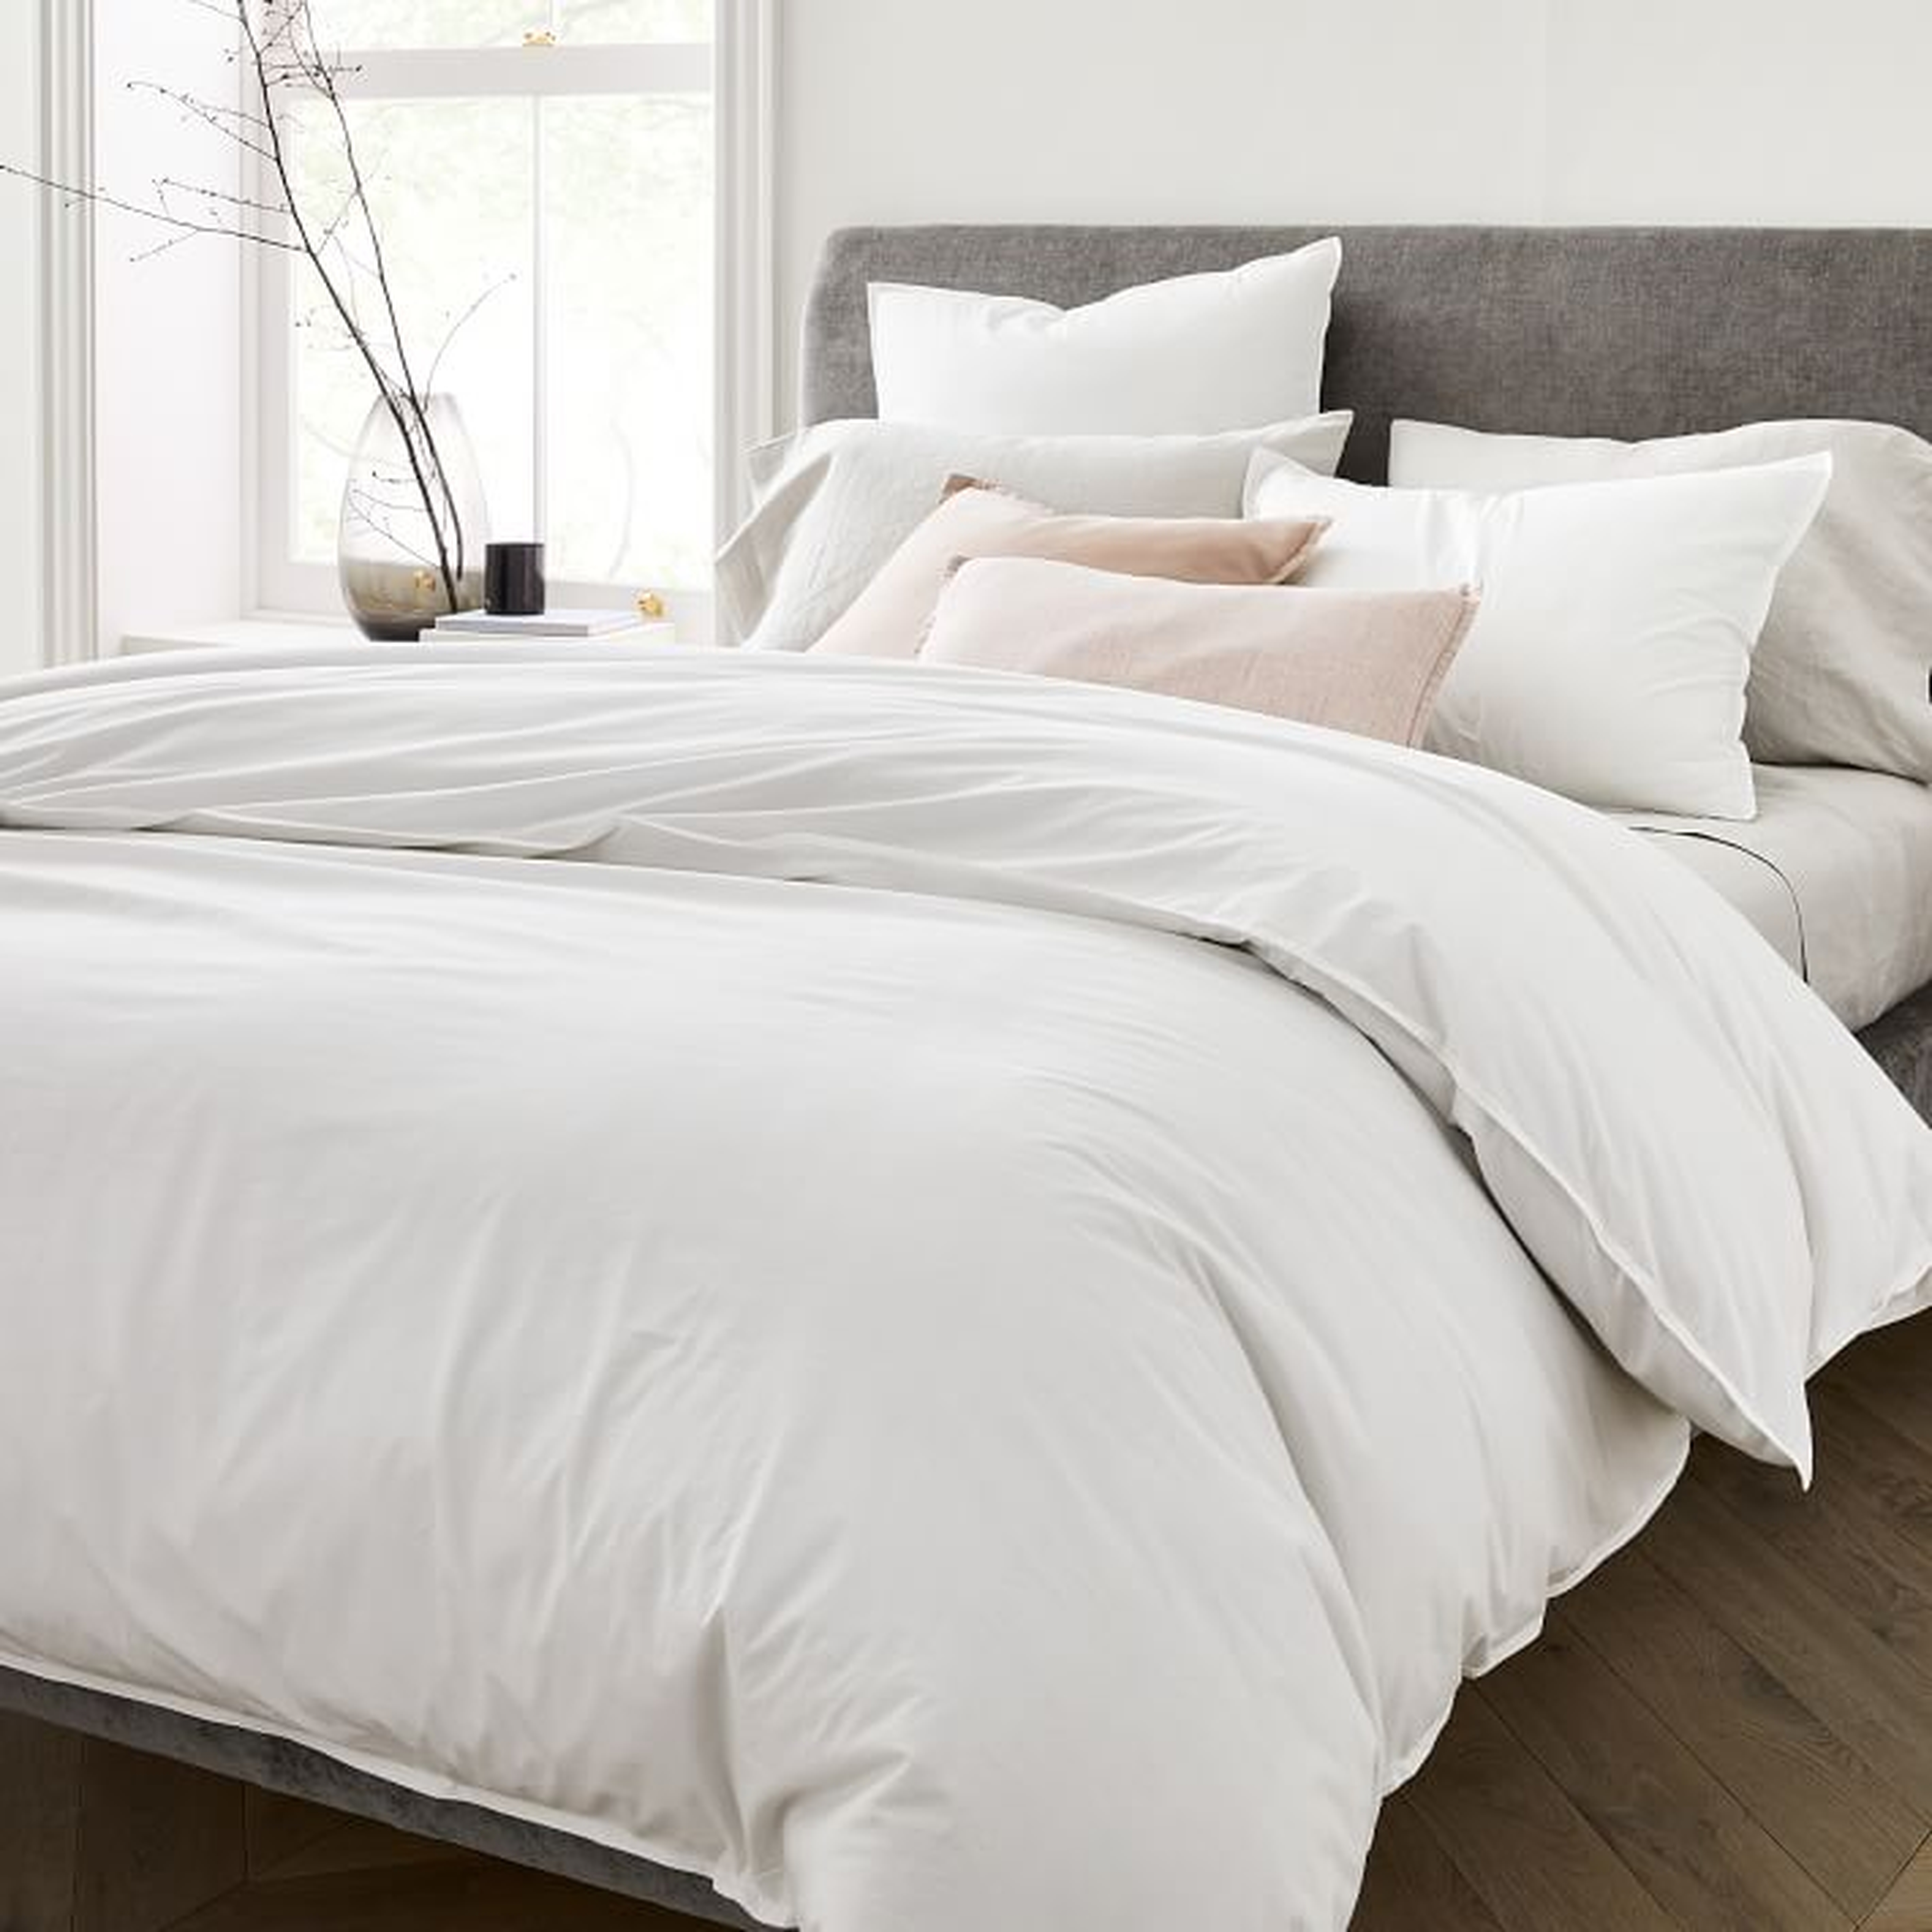 Organic Washed Cotton Percale Duvet Cover and 2 shams, King - West Elm